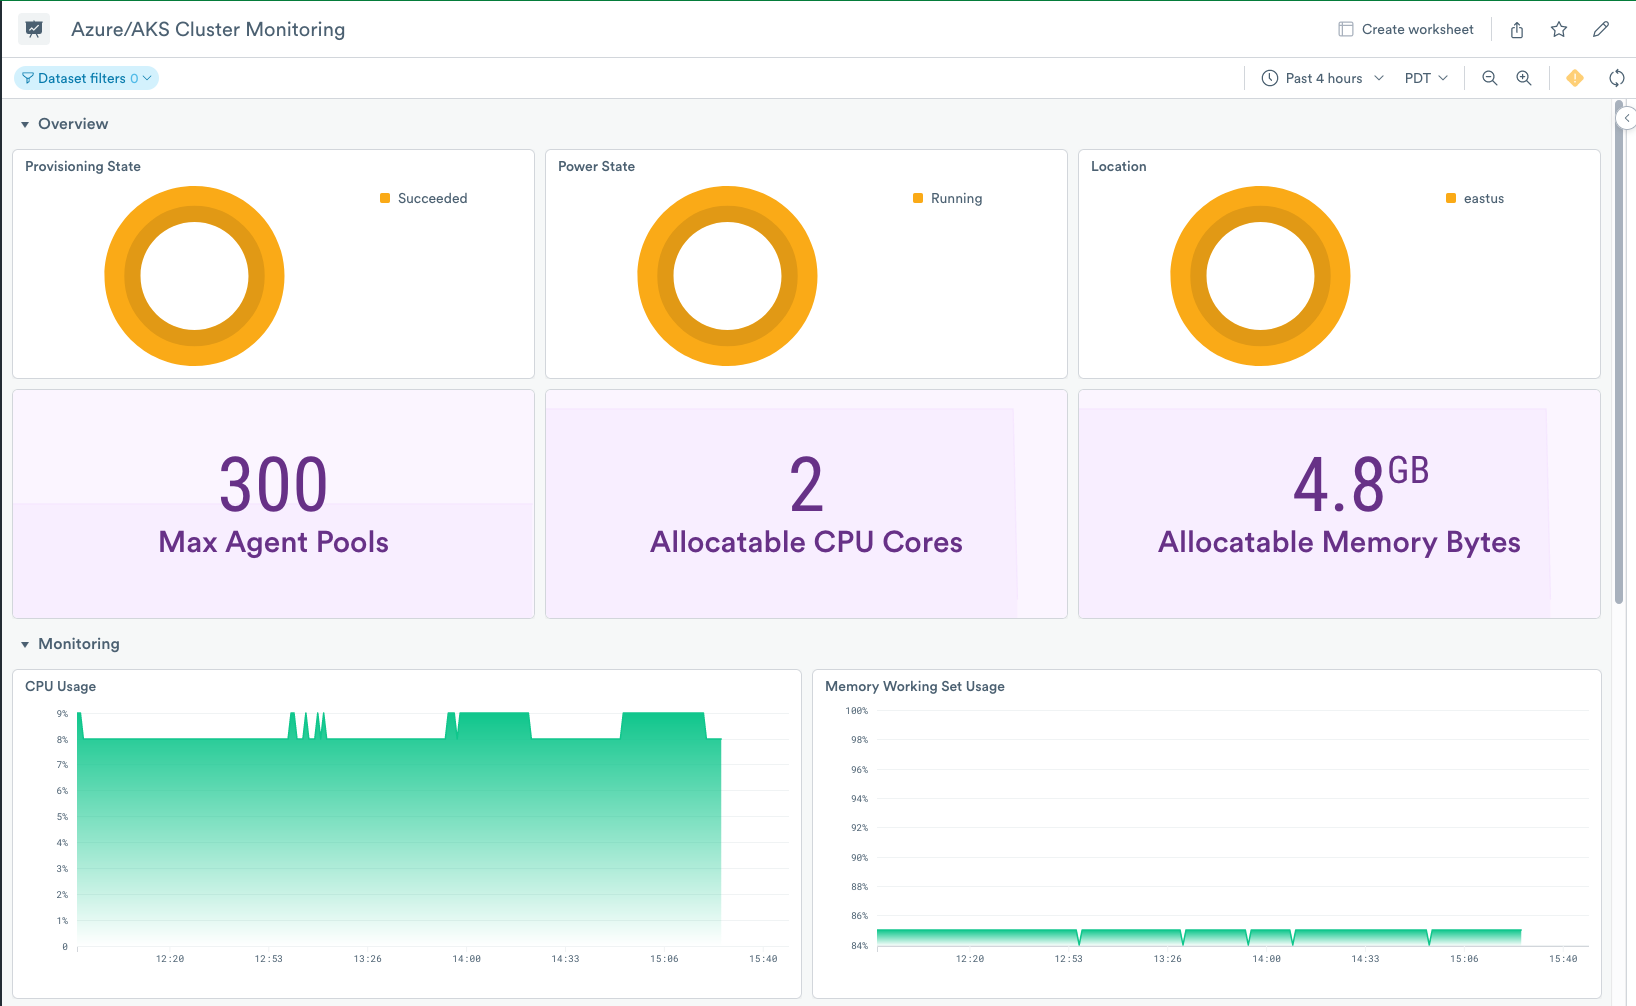 Monitoring dashboard for the Azure AKS